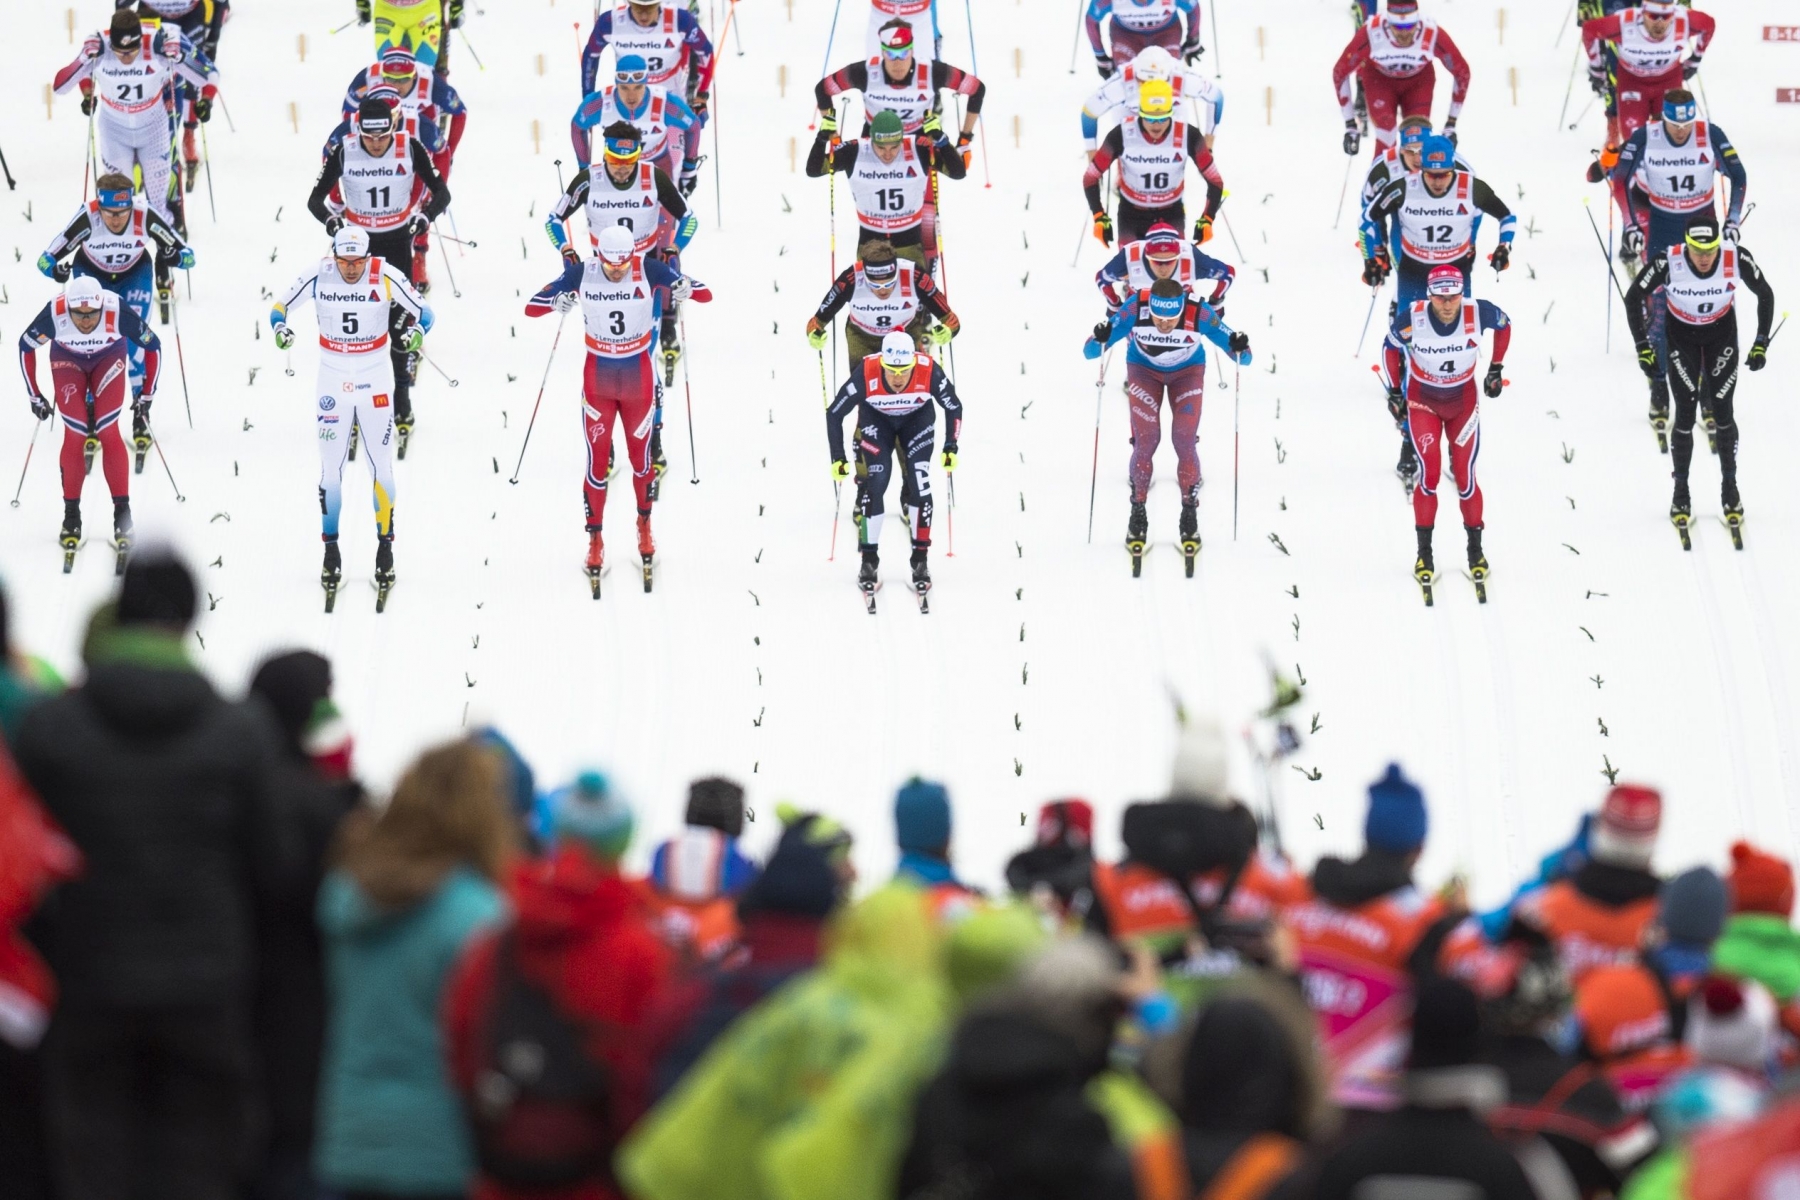 The field with Dario Cologna of Switzerland and winner Martin Johnsrud Sundby of Norway, from right, starts to the men's 30 km cross country skiing mass start race at the FIS Tour de Ski, on Saturday, January 2, 2016, in Lenzerheide, Switzerland. (KEYSTONE/Gian Ehrenzeller)